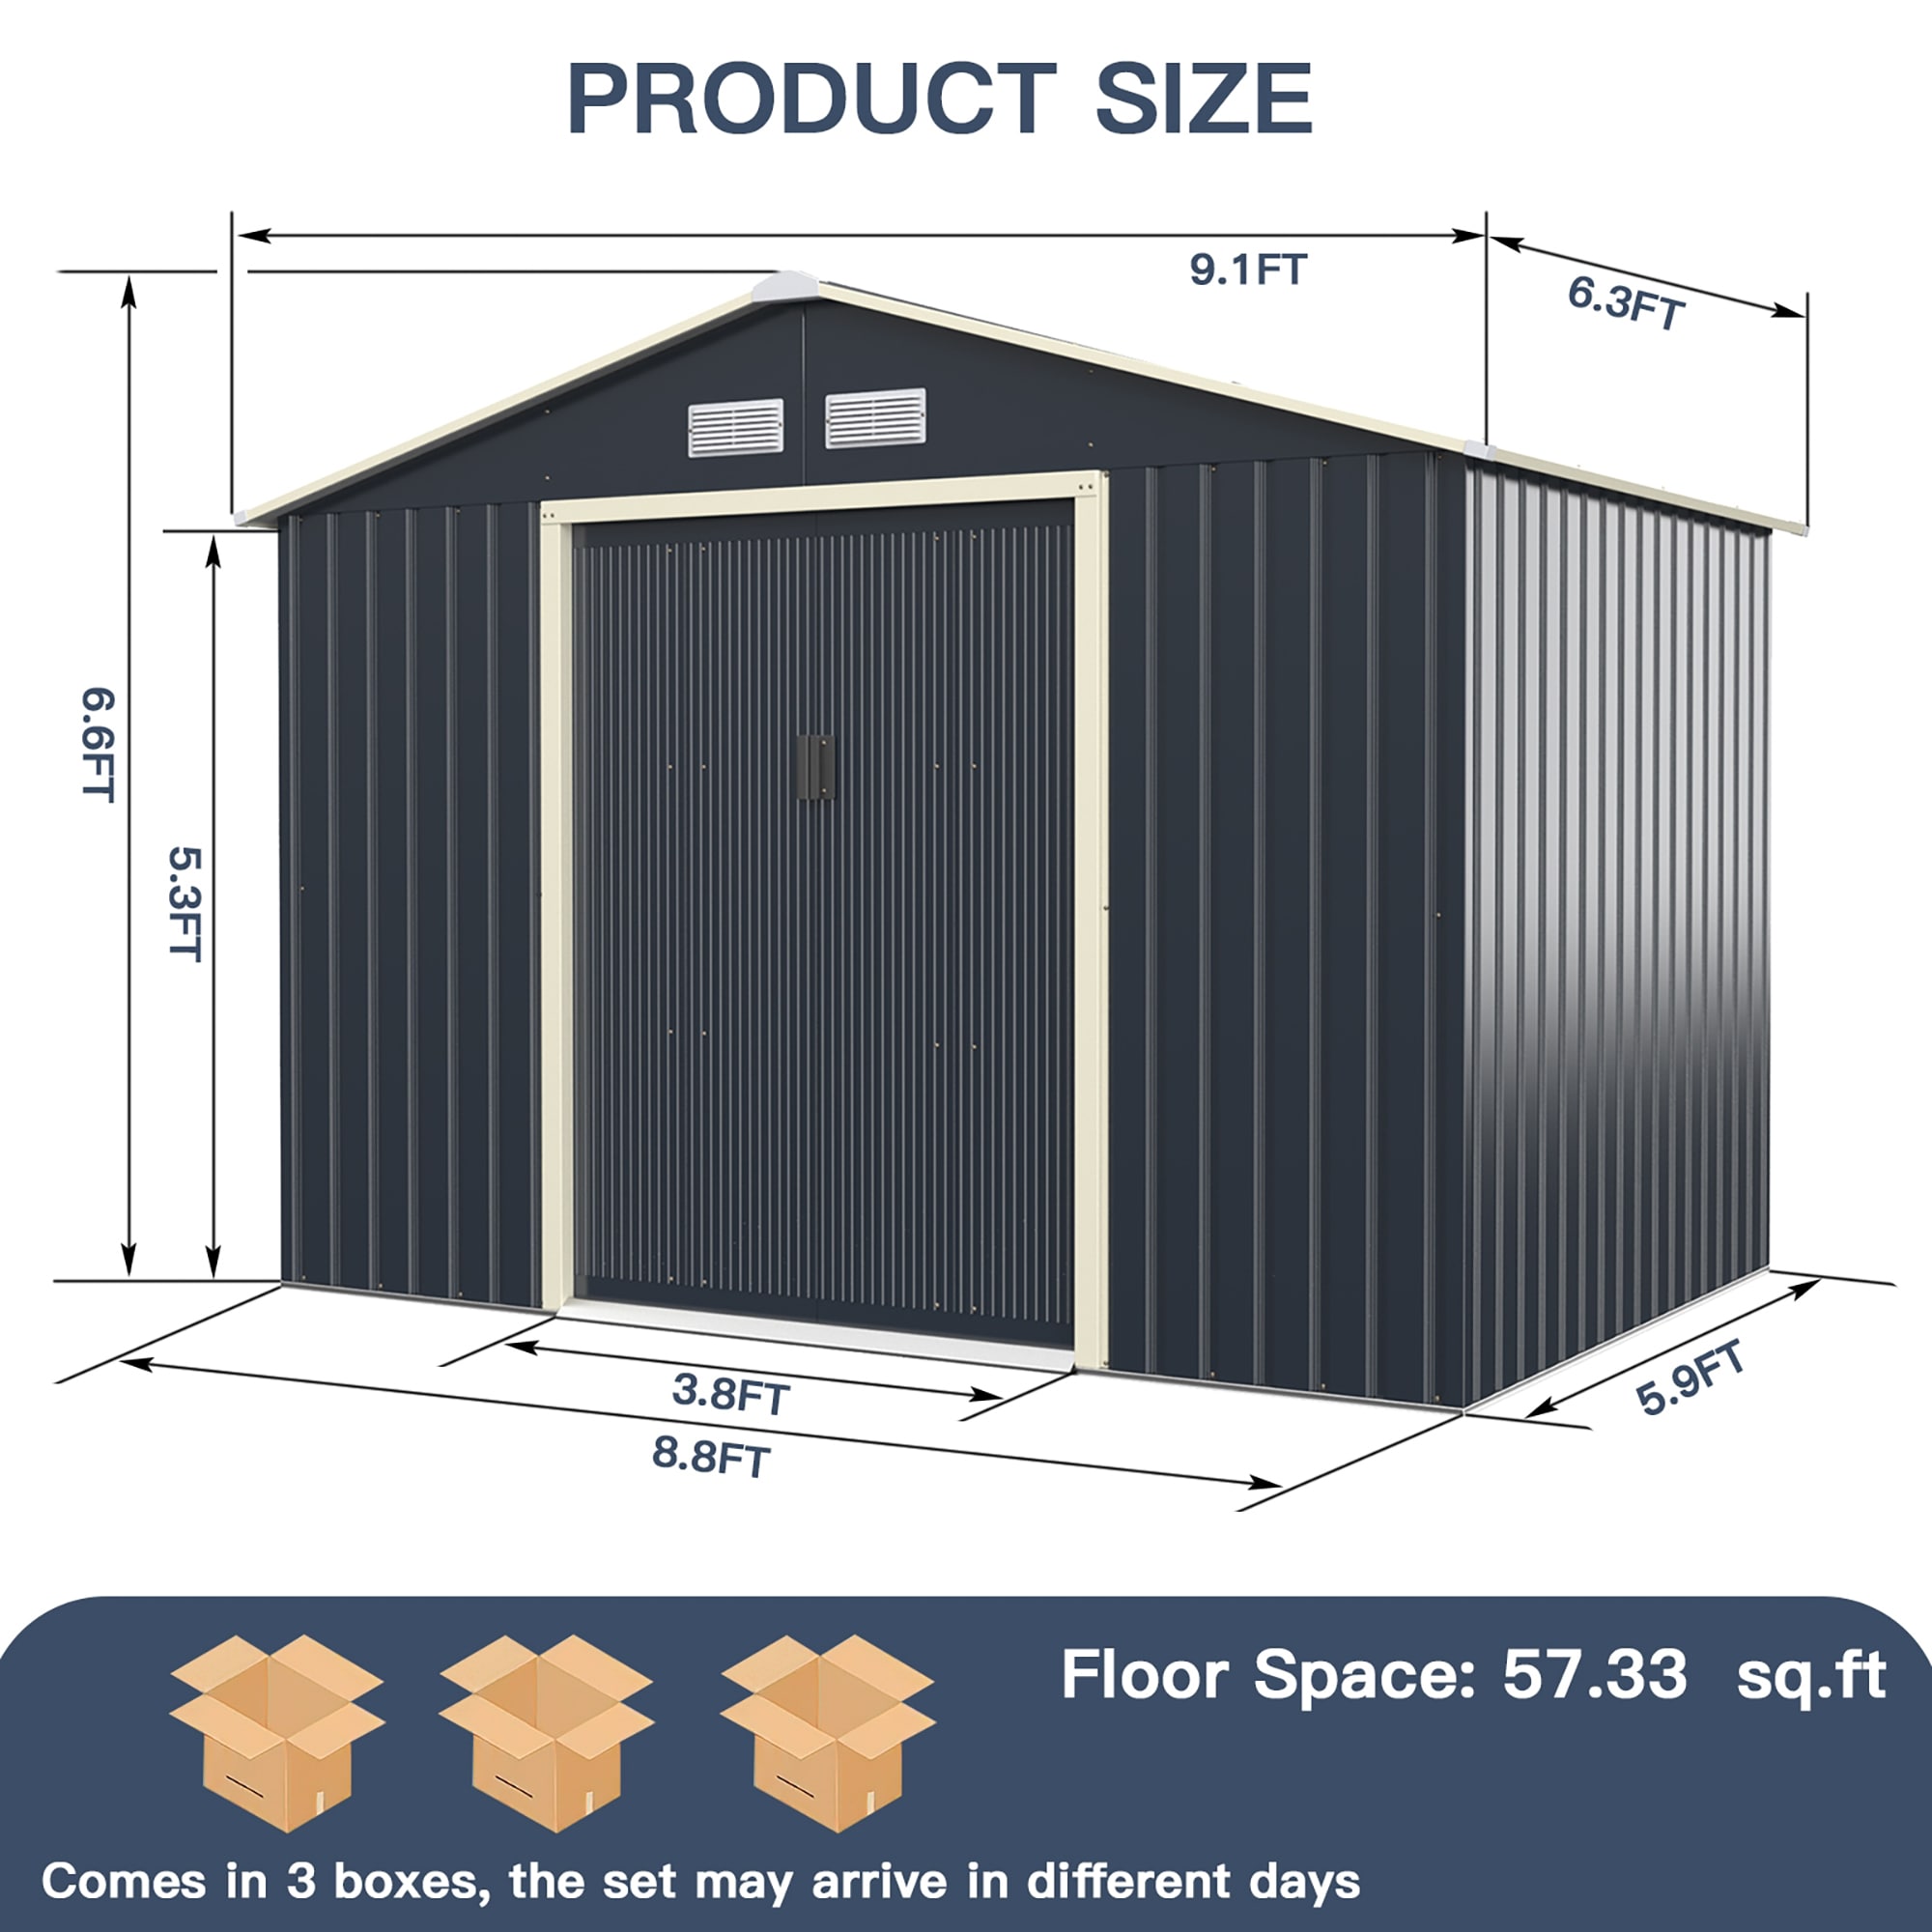 Forclover 6-ft x 9-ft 9 x 6-ft Metal Storage Shed Vinyl-coated Steel ...